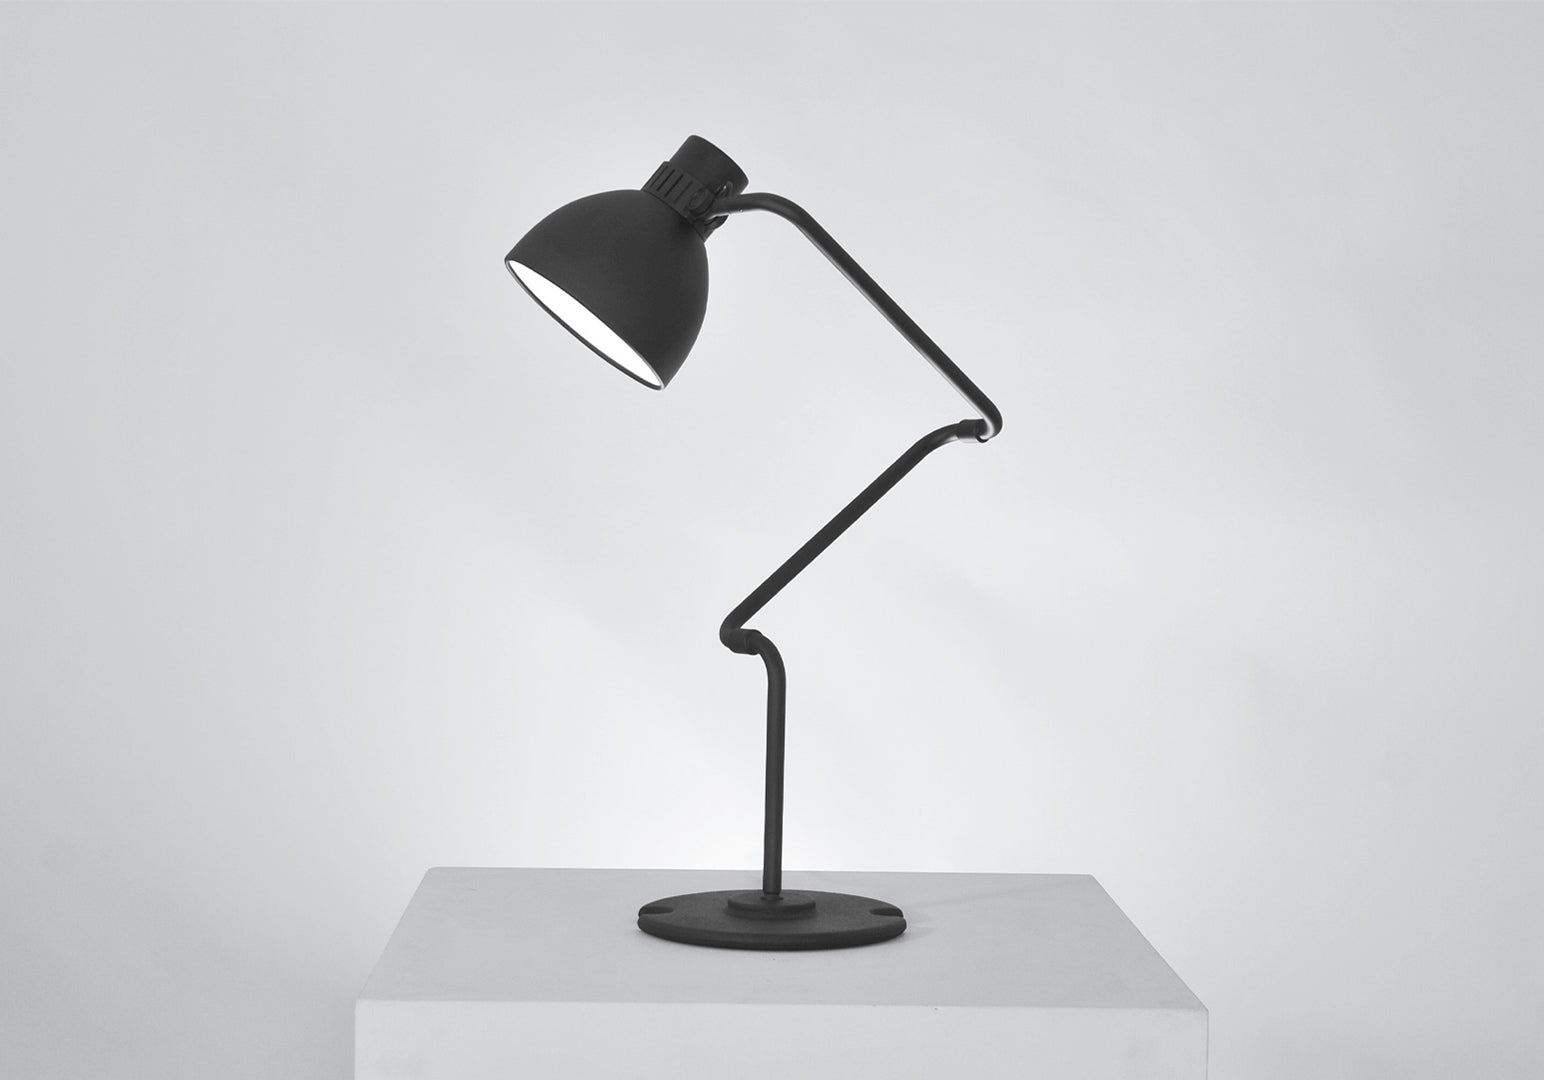 Blux System T30 Table Lamp